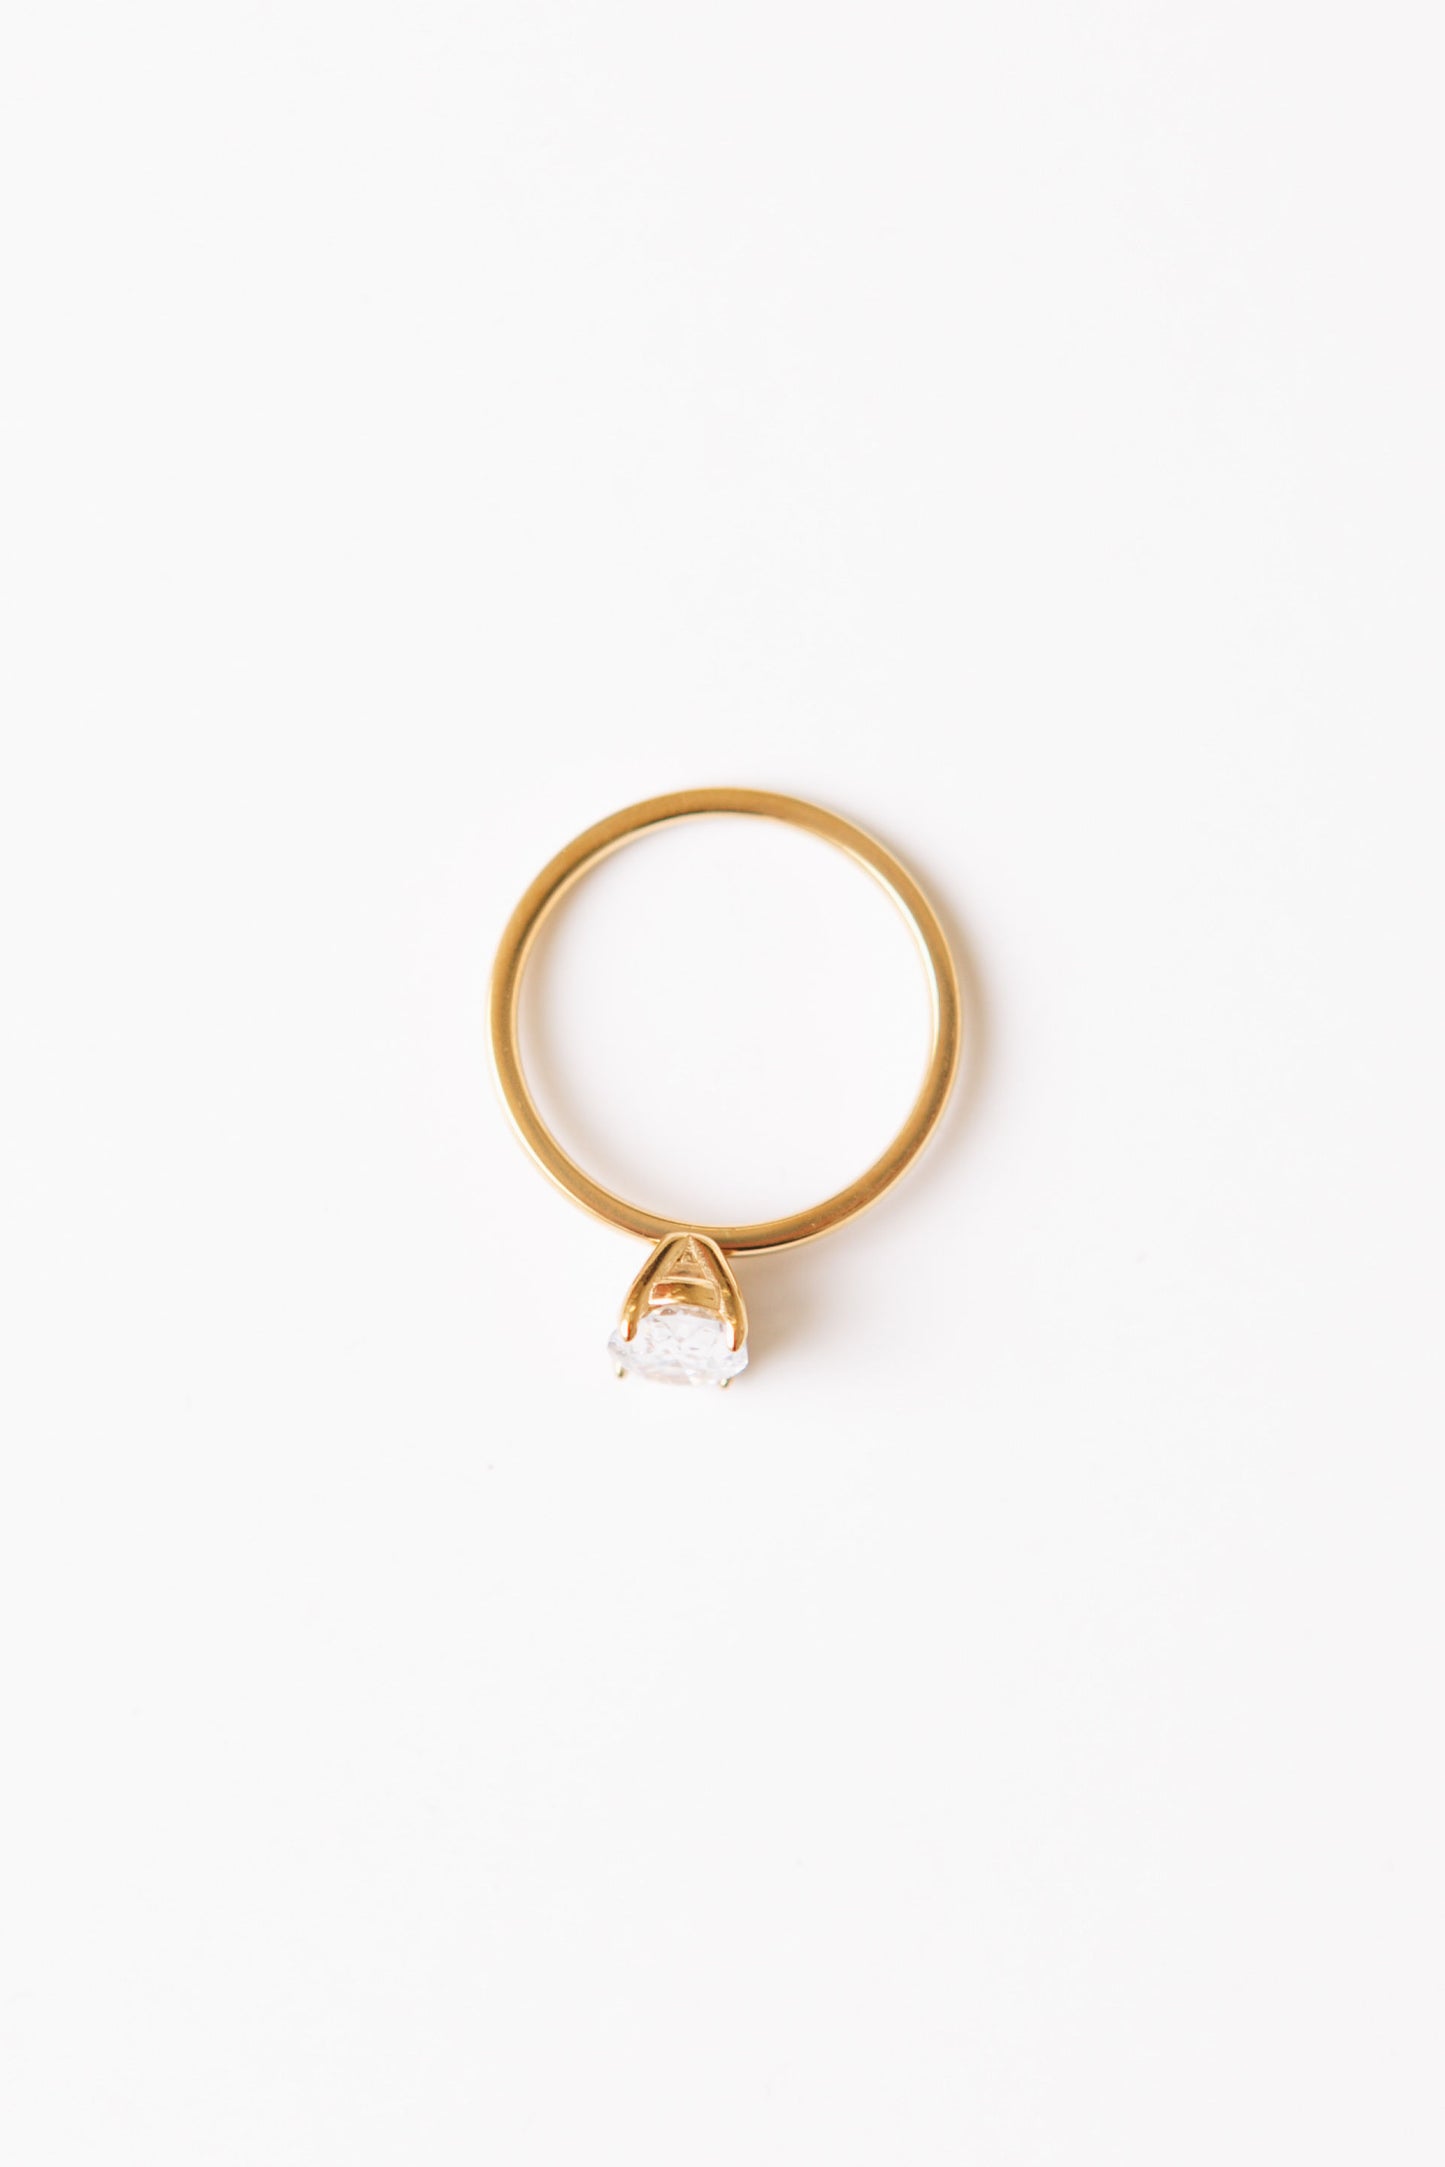 RESTOCKED 9/11 - Tabby - Solitaire Anniversary Crystal Gold Waterproof Ring